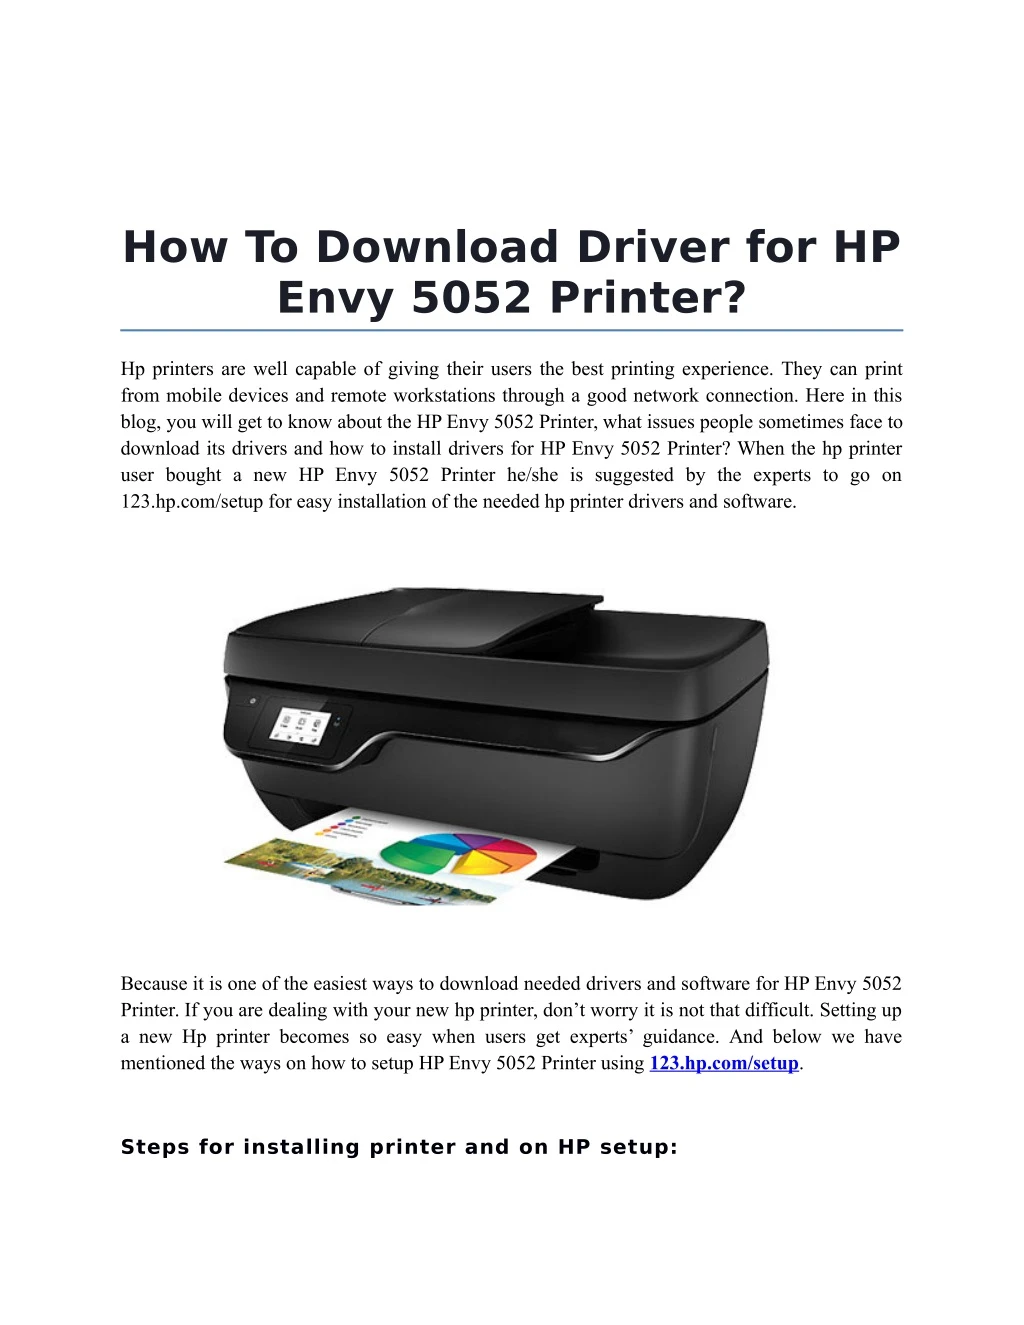 how to download driver for hp envy 5052 printer